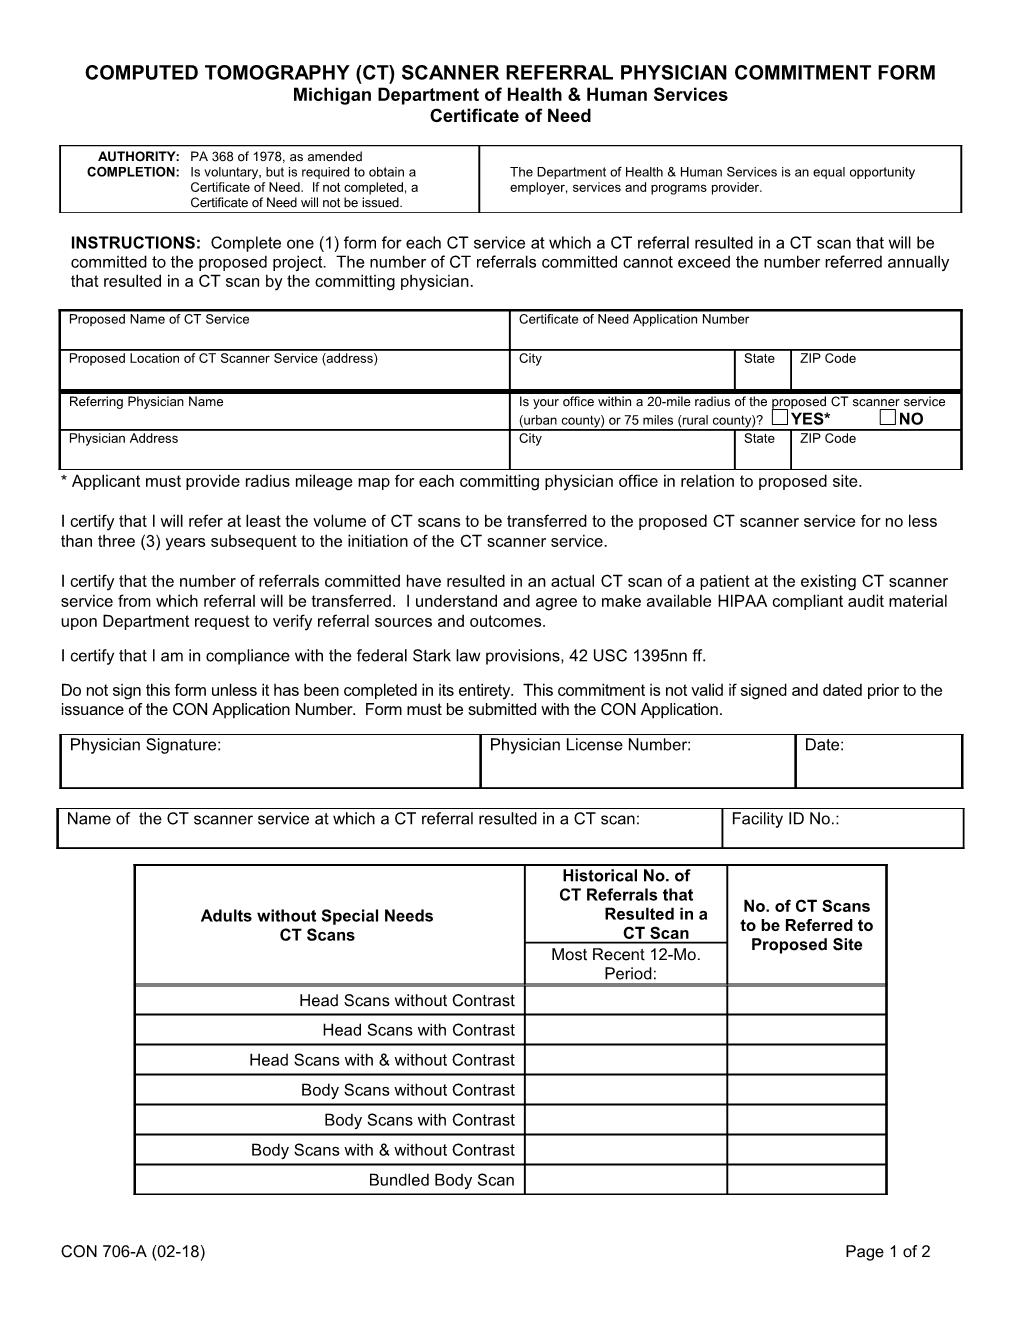 Ct Scanner Referral Physician Commitment Record